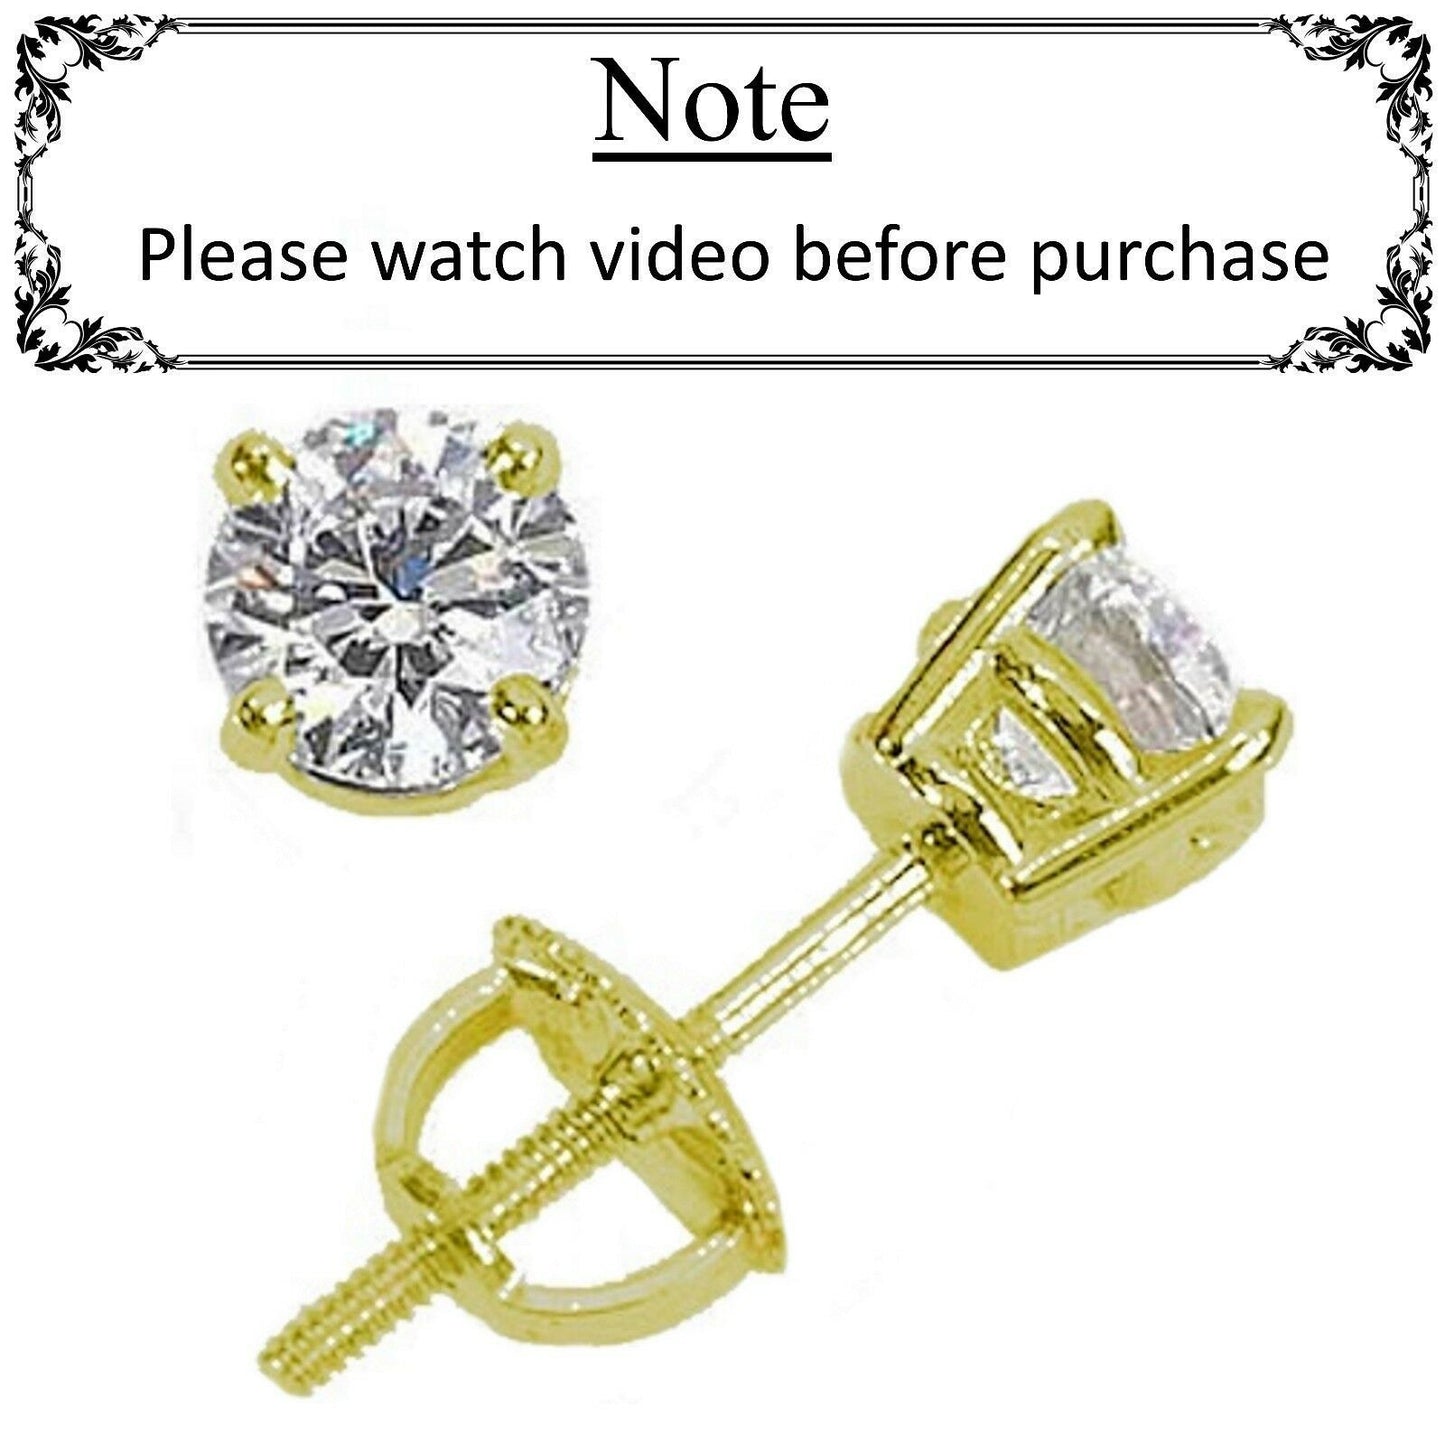 1.25 ct ROUND CUT diamond stud earrings 14k YELLOW GOLD COLOR 100 % NATURAL SI1